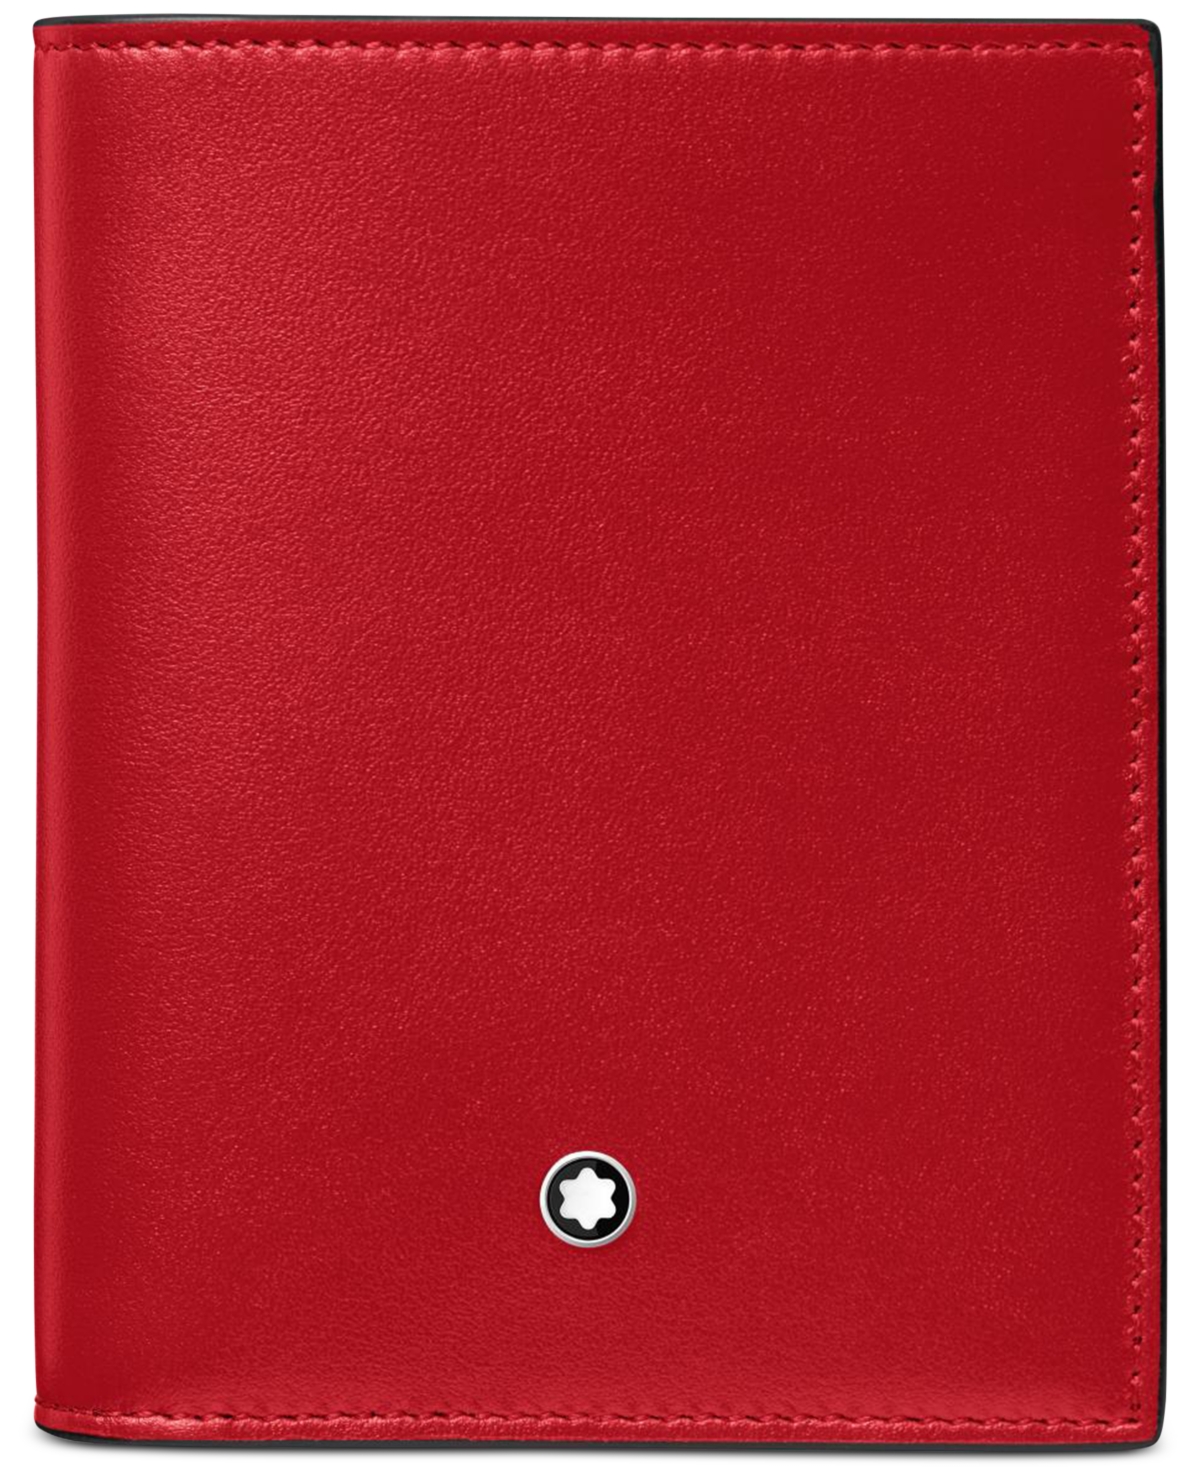 Montblanc Meisterstuck 6 Card Compact Wallet In Coral